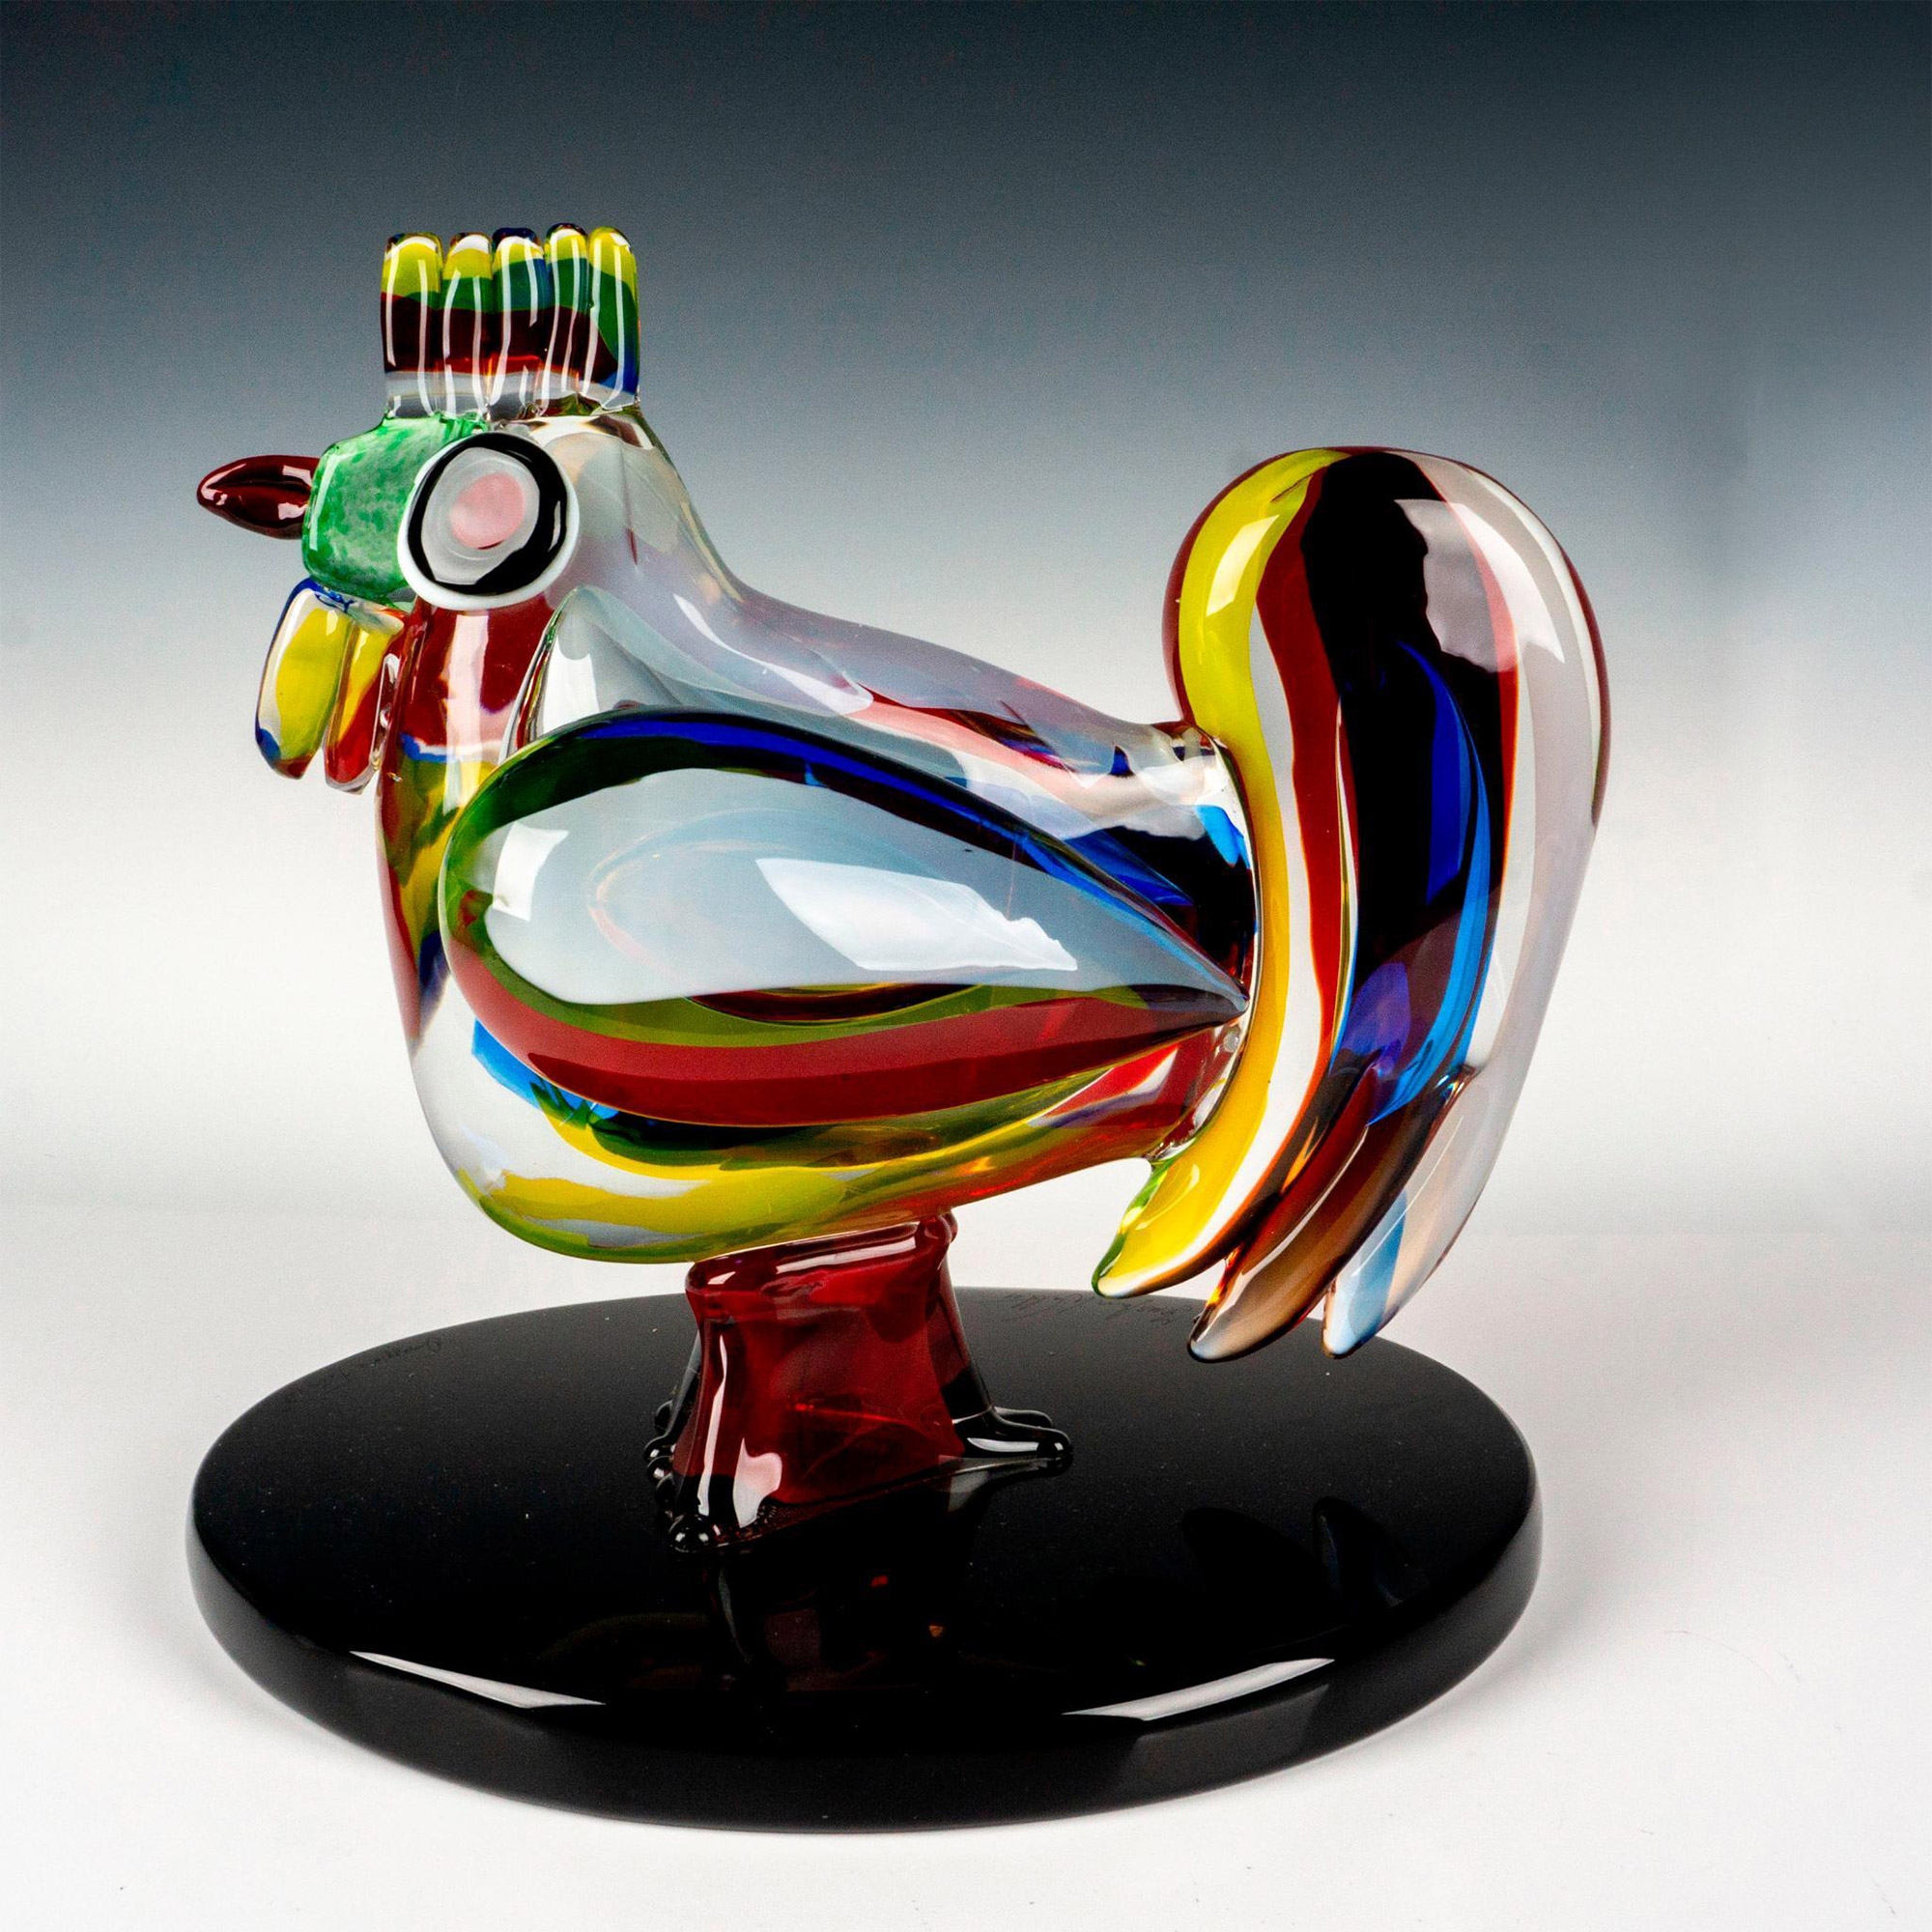 A large colorful glass figure of chicken attached to a black glass base - Walter Furlan